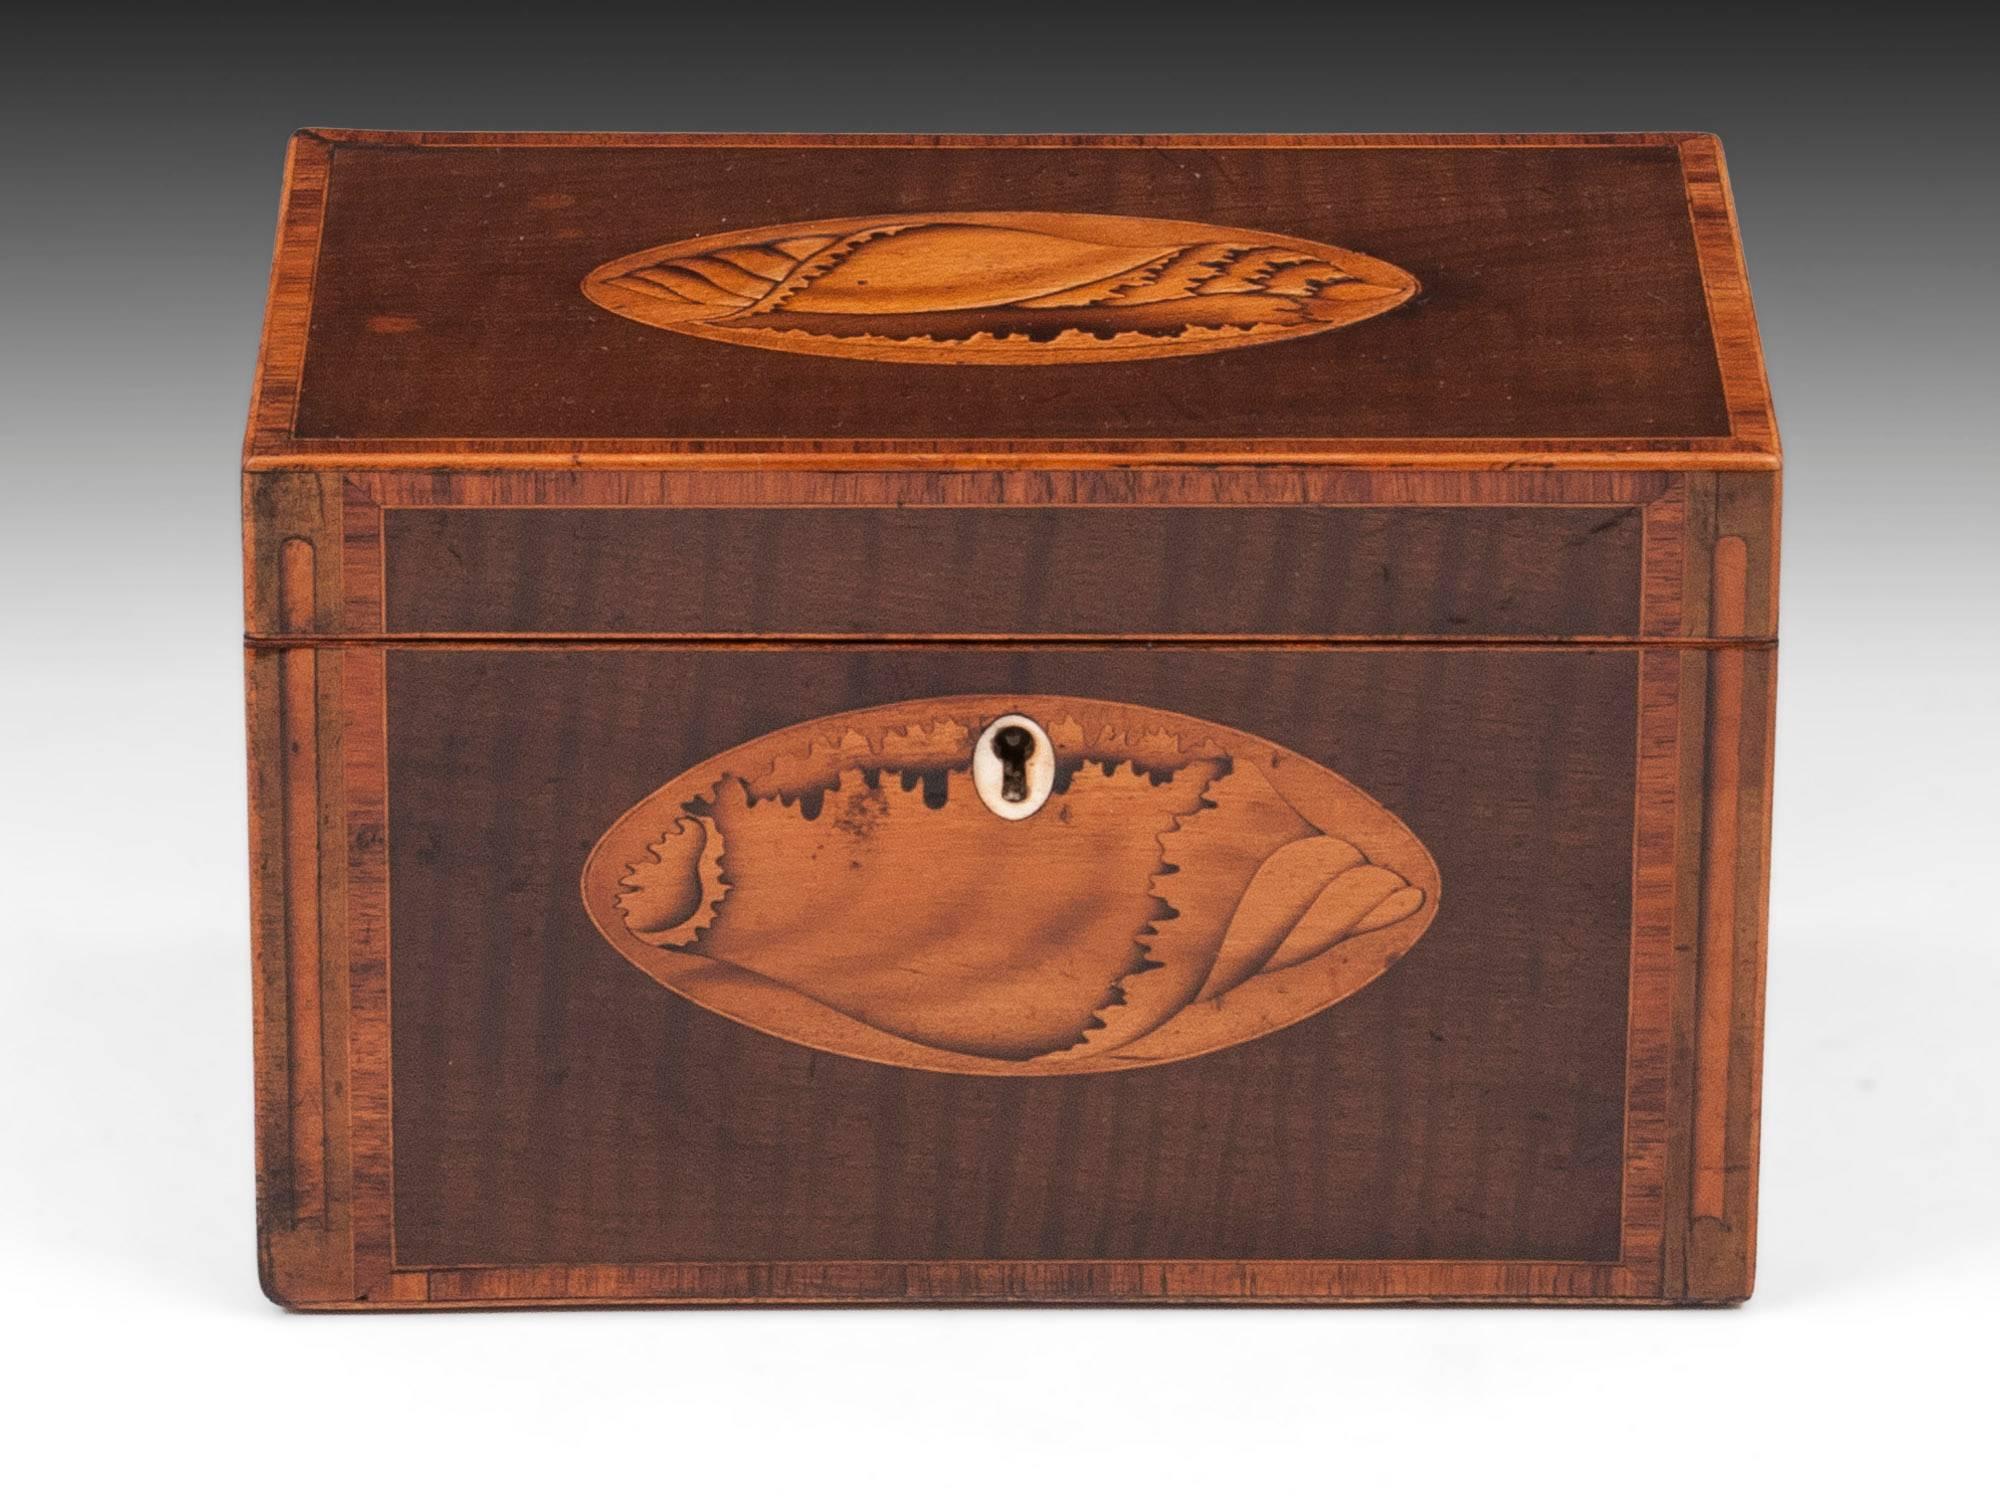 Antique tea caddy veneered in Harewood with beautiful inlaid conch shells to the top and front with a oval bone escutcheon. The tea caddy is edged in boxwood with a tulipwood crossbanding. The front also has a single boxwood shaded flute inlaid into